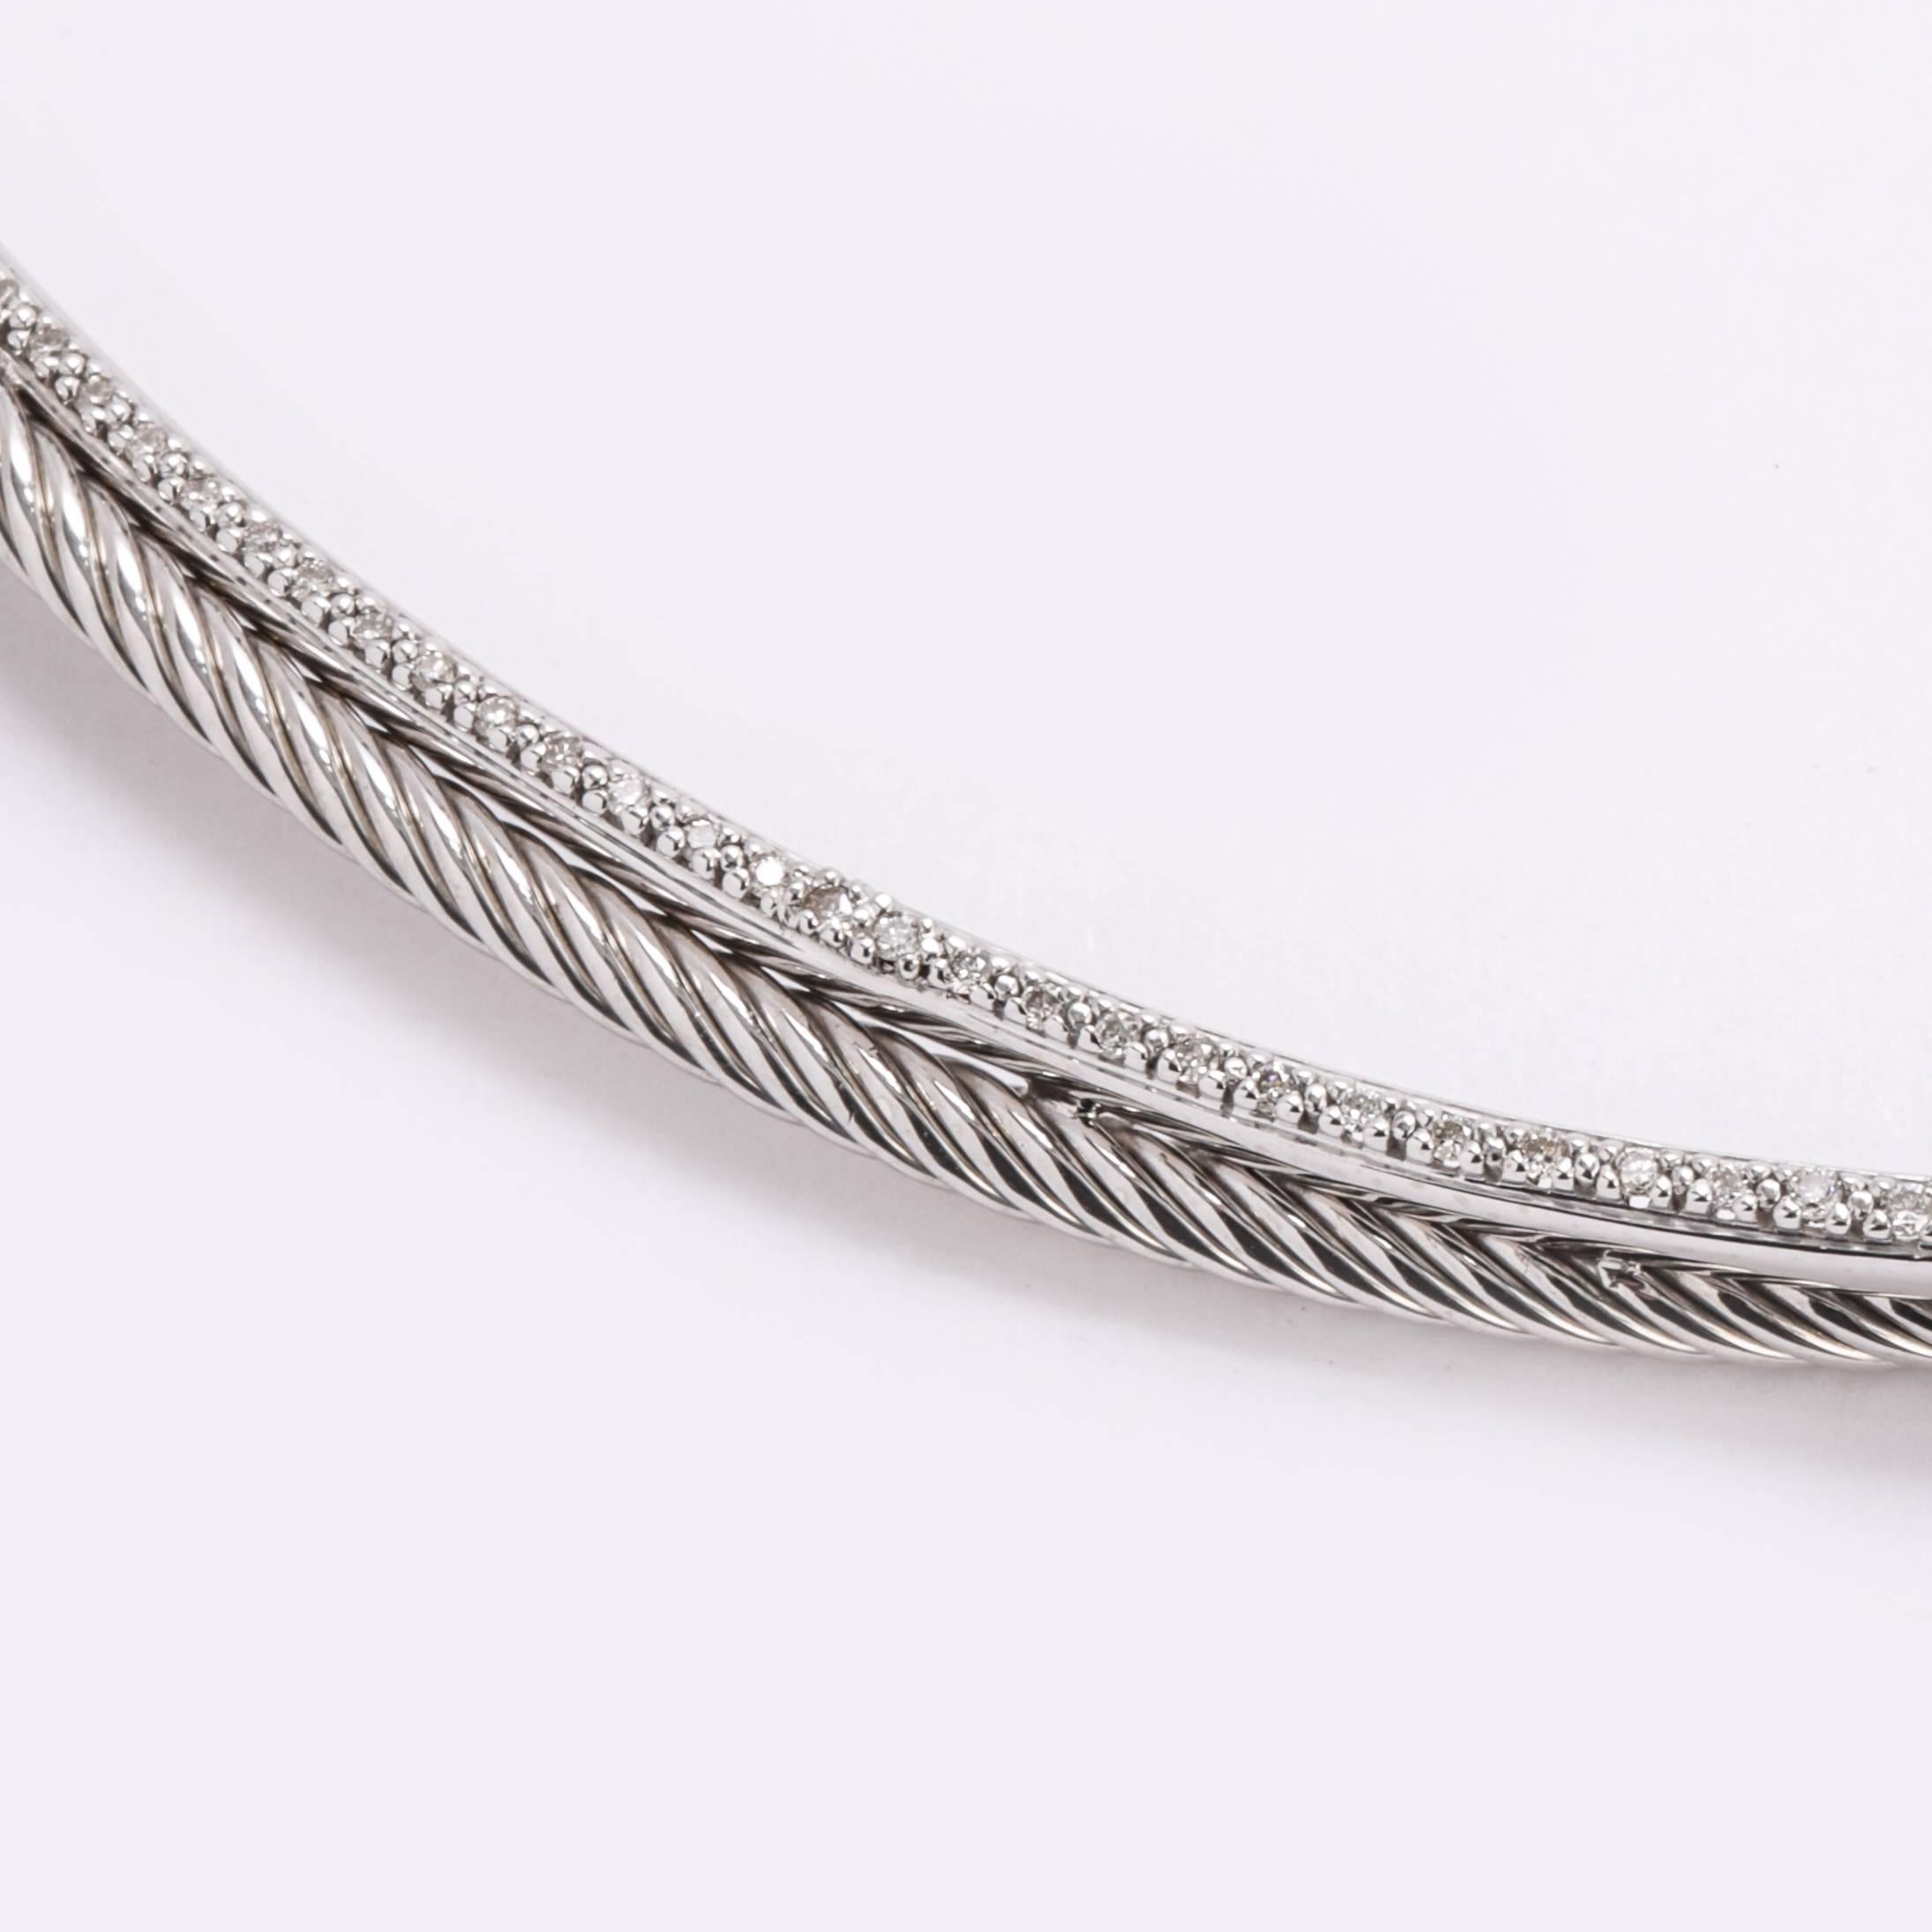 Previously loved sterling silver David Yurman Diamond Cable Collar necklace featuring round brilliant diamonds pave set with lobster claw closure.